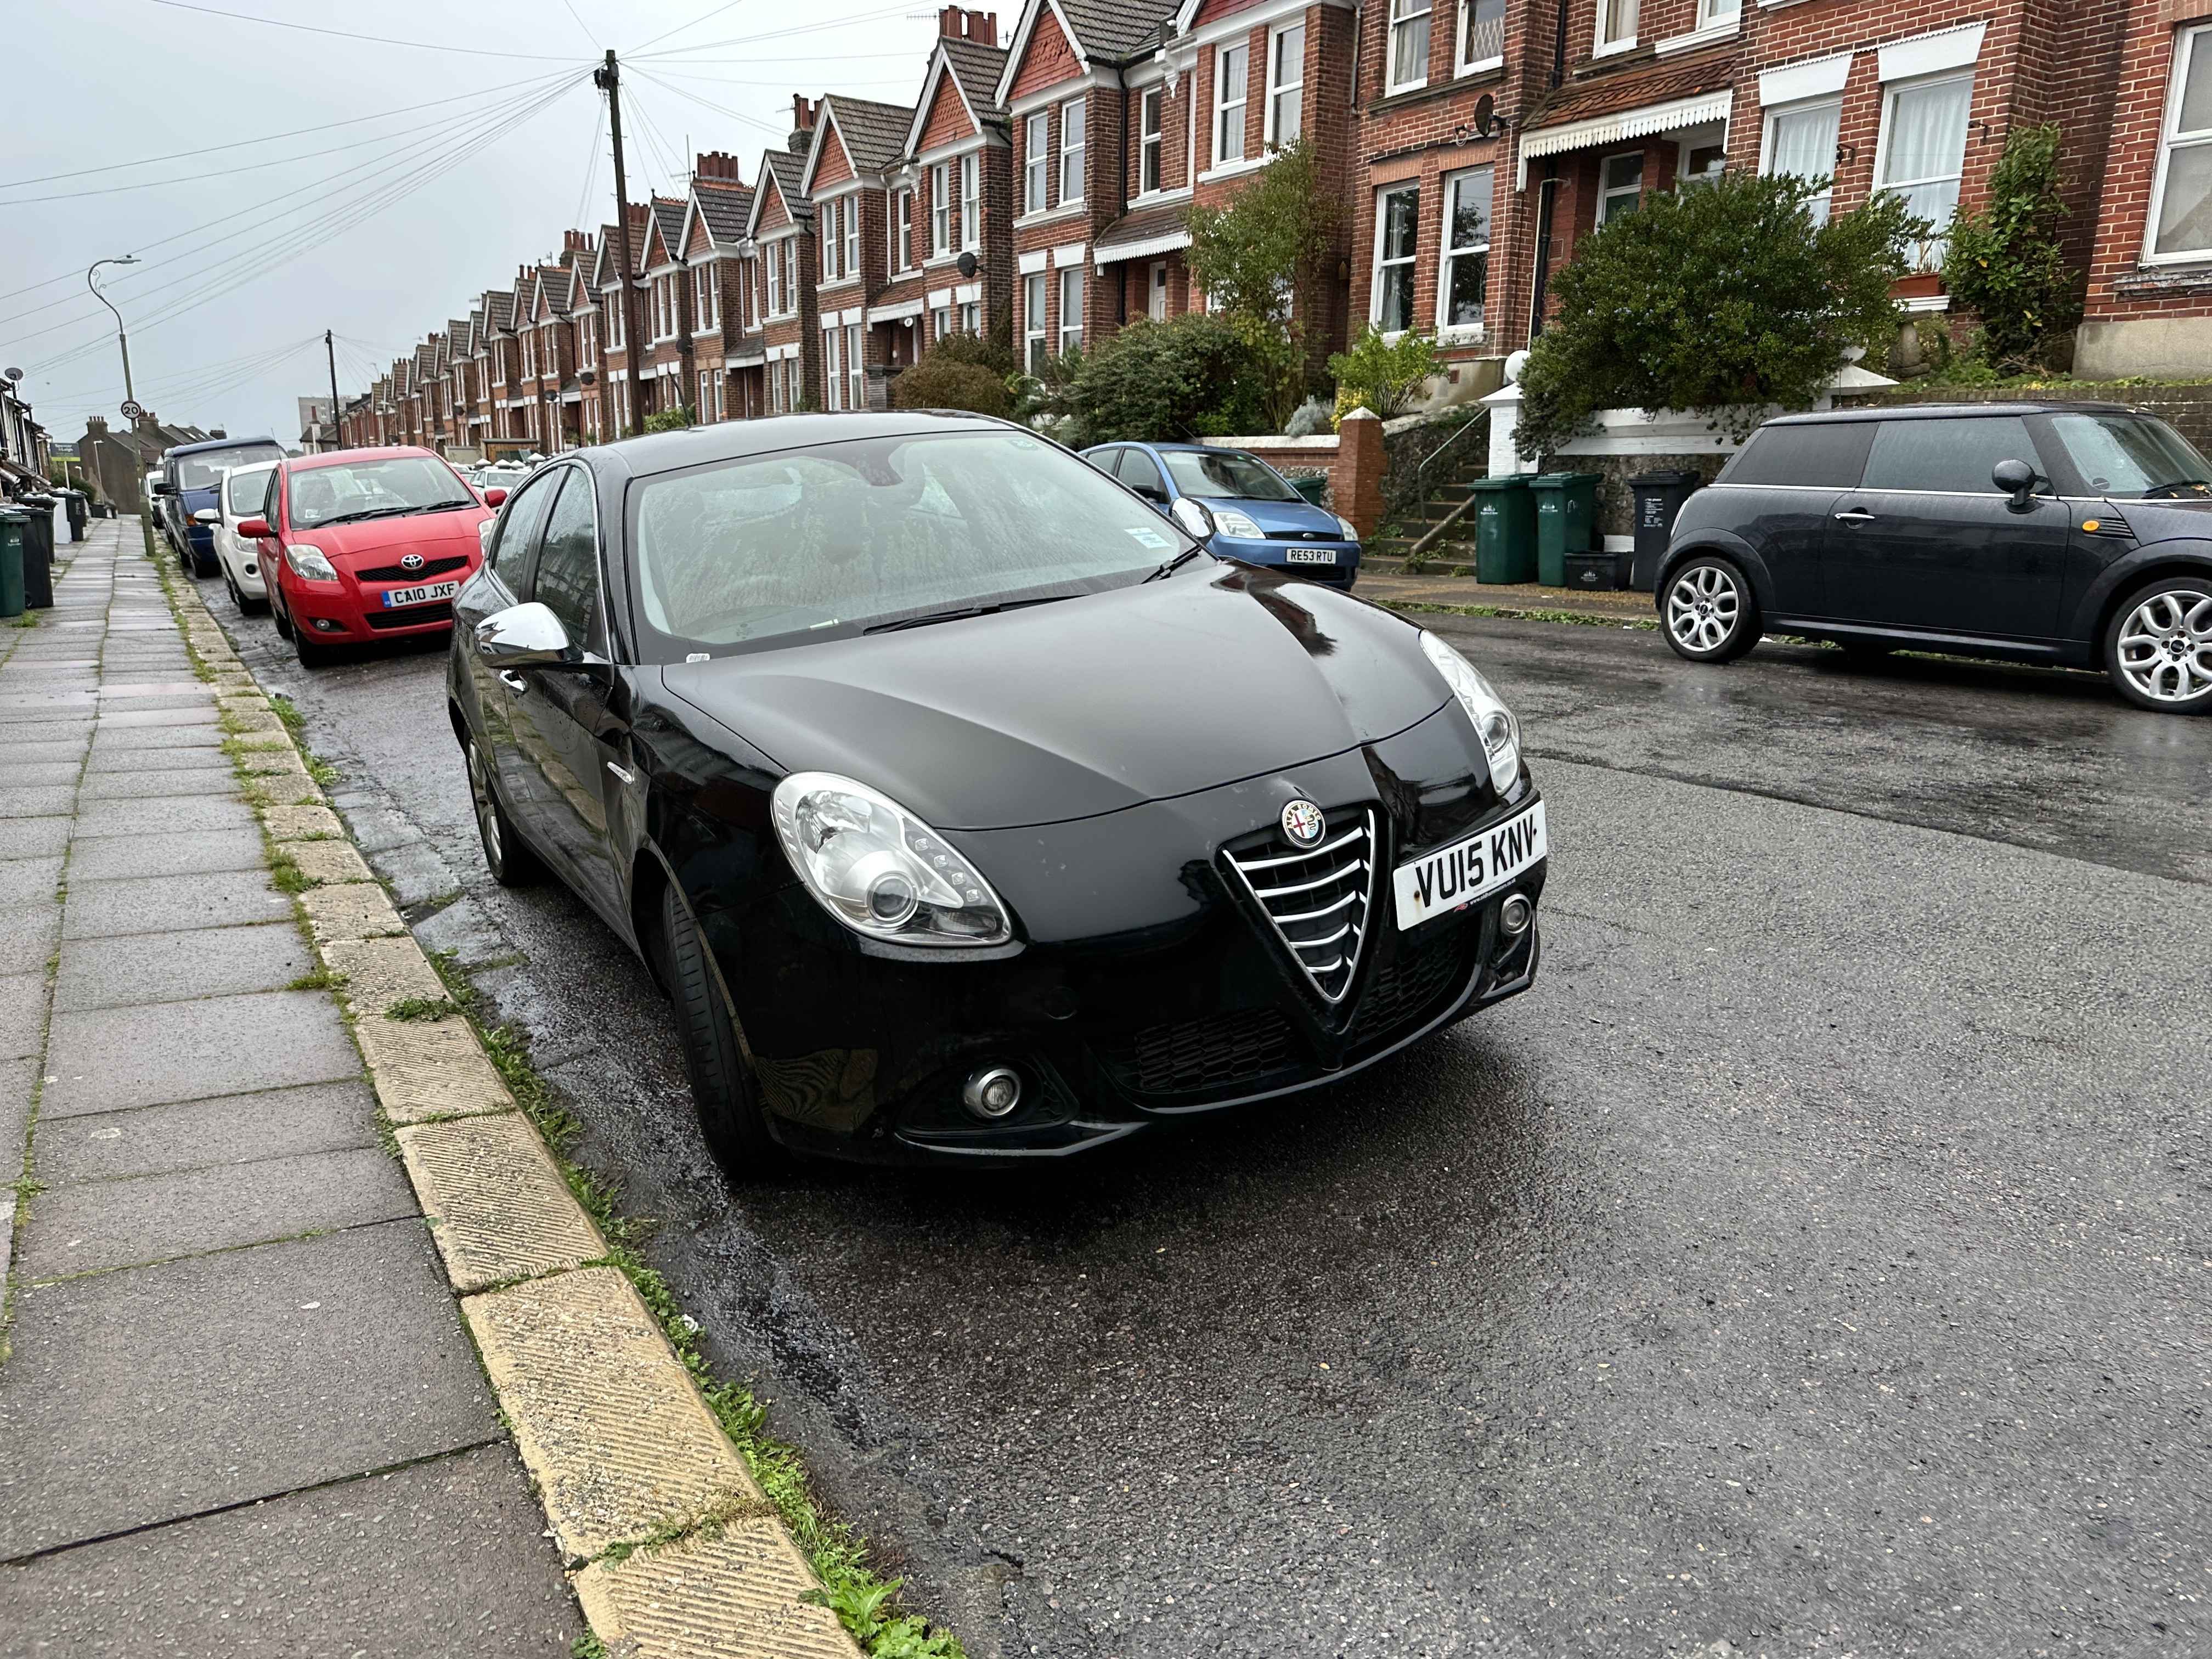 Photograph of VU15 KNV - a Black Alfa Romeo Giulietta parked in Hollingdean by a non-resident. The fifth of ten photographs supplied by the residents of Hollingdean.